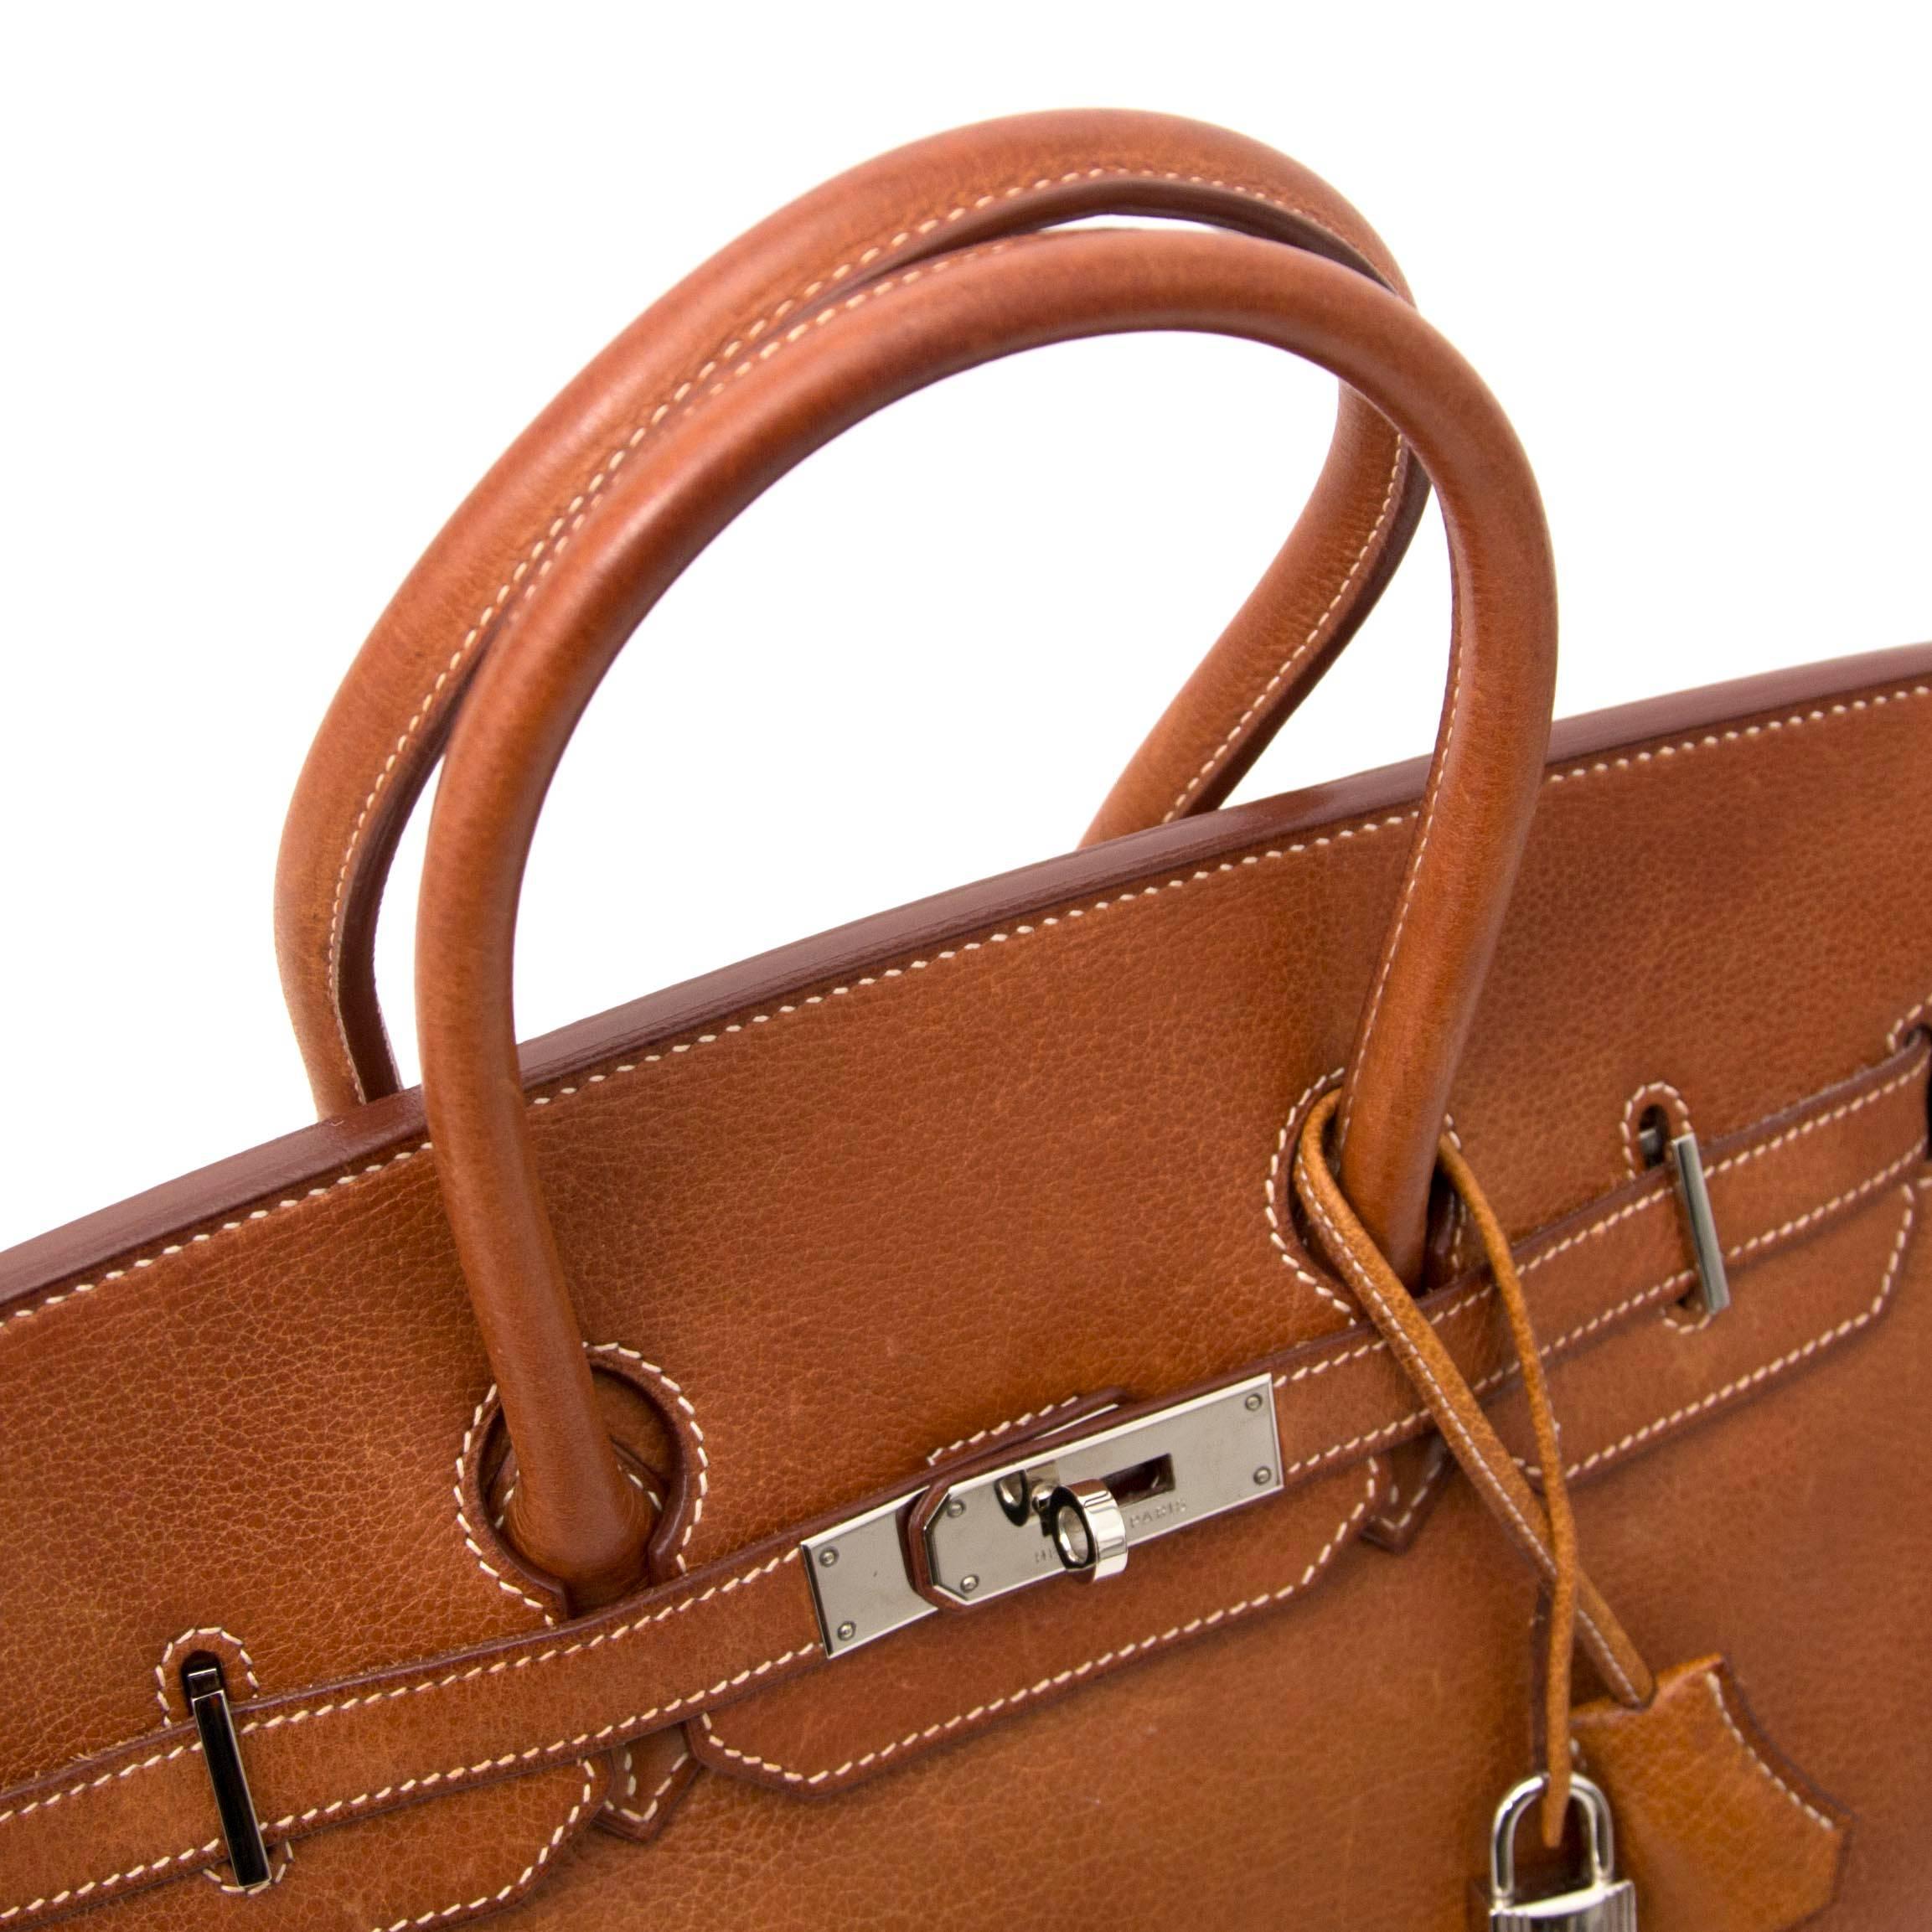 A very rare and exclusive piece! This beautiful Birkin 35 is made out of Buffalo Sindhu leather. This leather is crafted from the hide of a water buffalo. 
The leather features a unique grain size and amazing coloring. This type of leather is